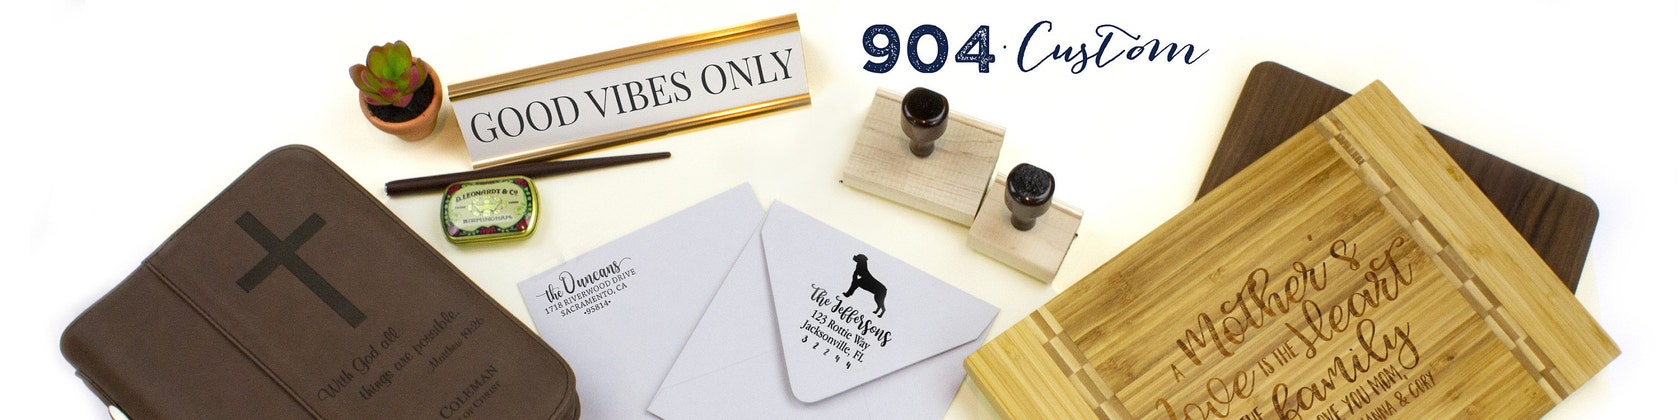 Personalized Gifts Custom Stamps And Desk Plates By 904custom